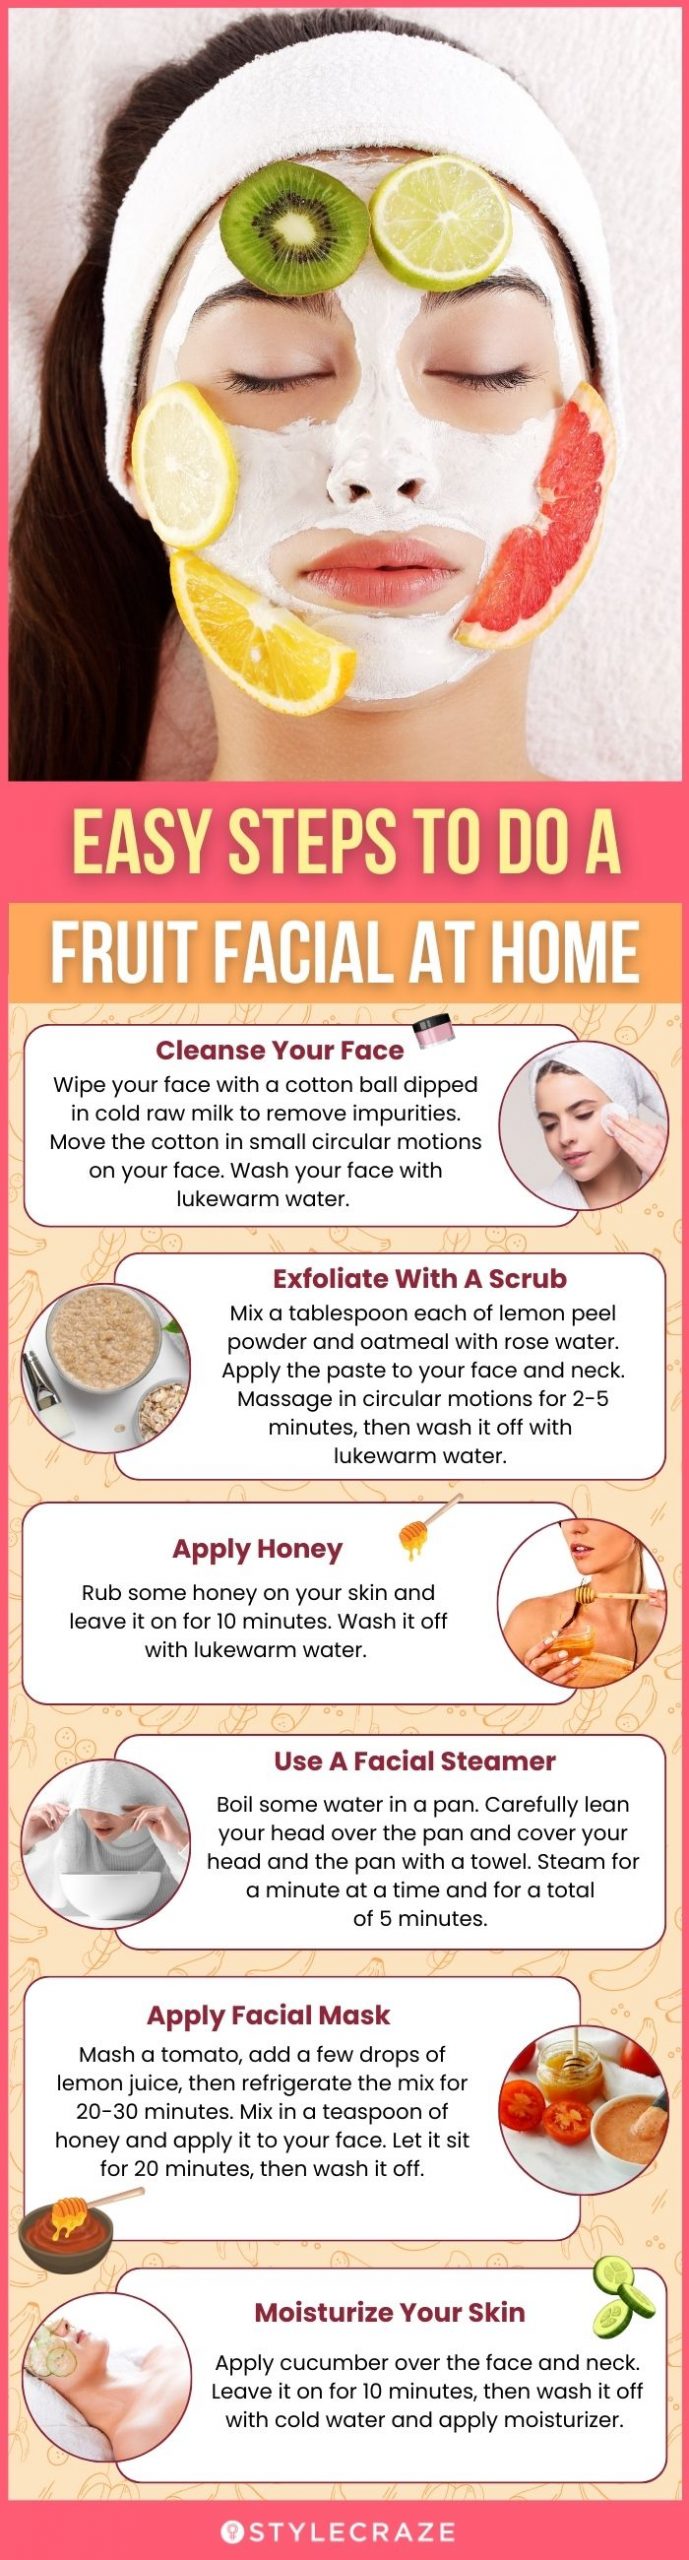 fruit facial at home step by step tutorial (infographic)